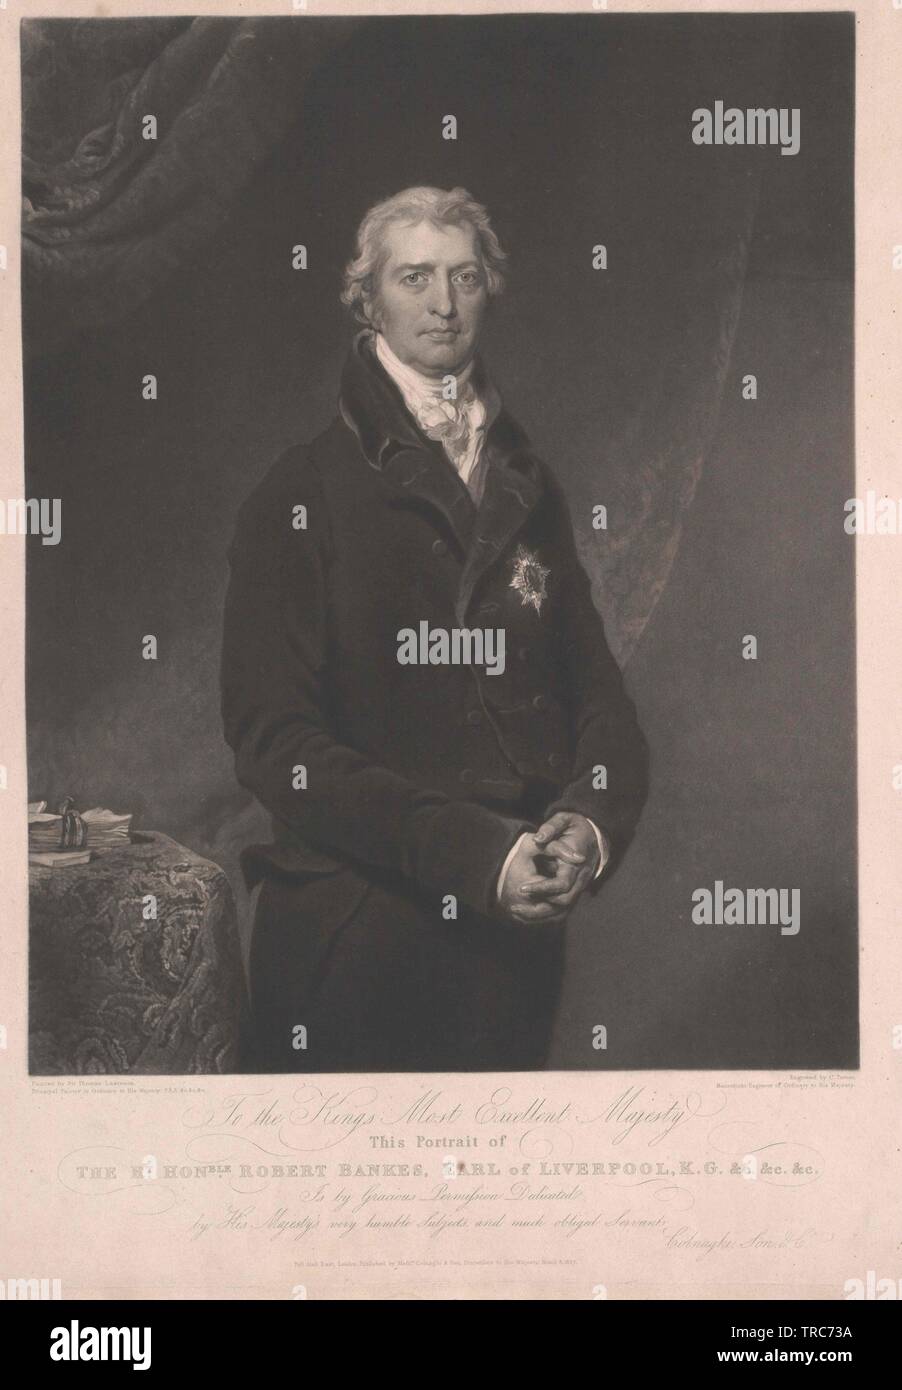 Jenkinson, 2nd earl of Liverpool, Robert bank, Additional-Rights-Clearance-Info-Not-Available Stock Photo